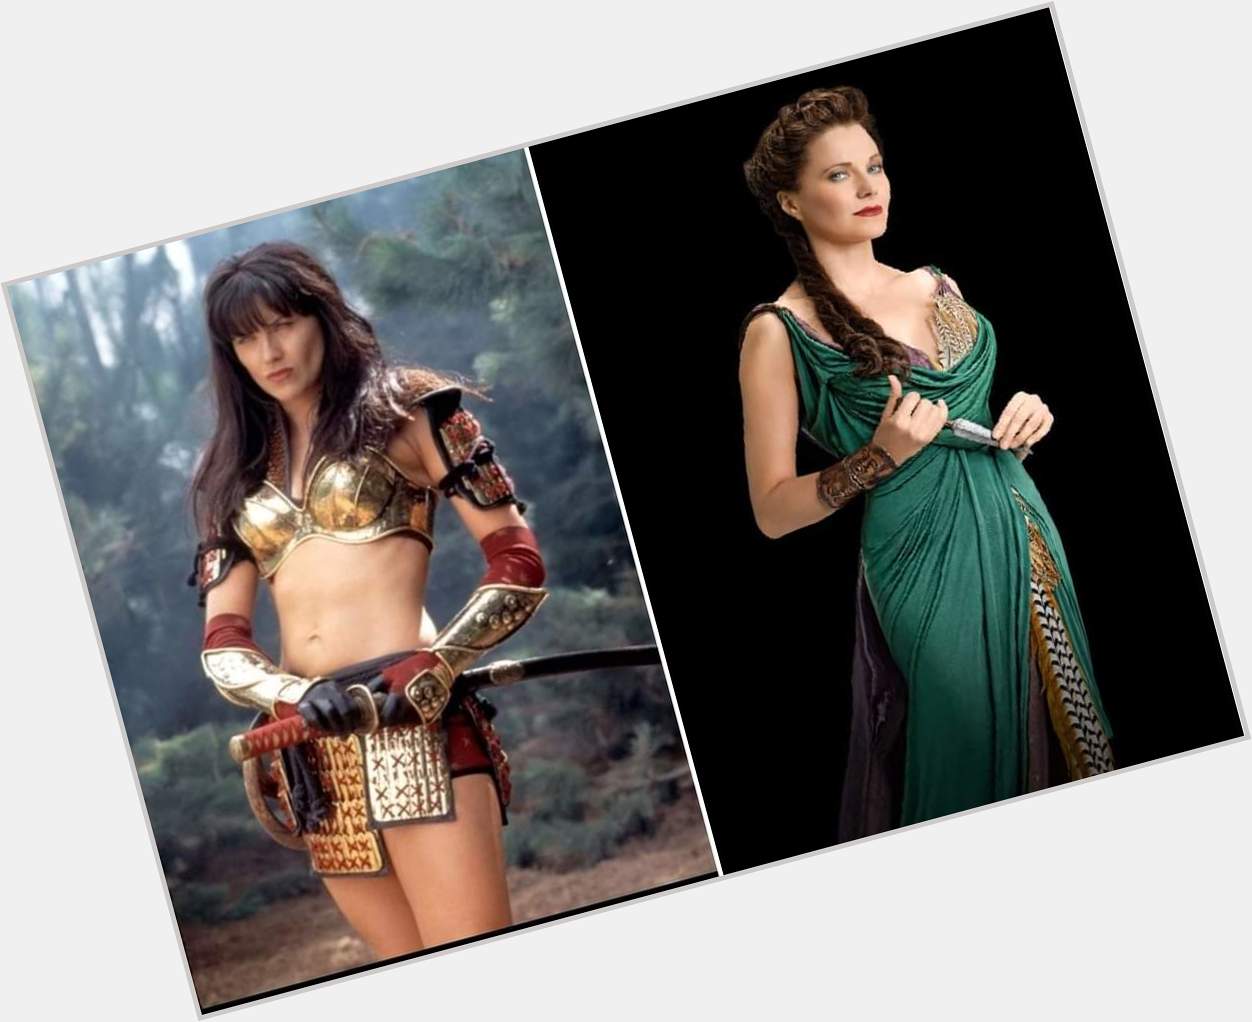 Happy birthday Lucille Frances Lucy Lawless
March 29, 1968 (age 54 years) 